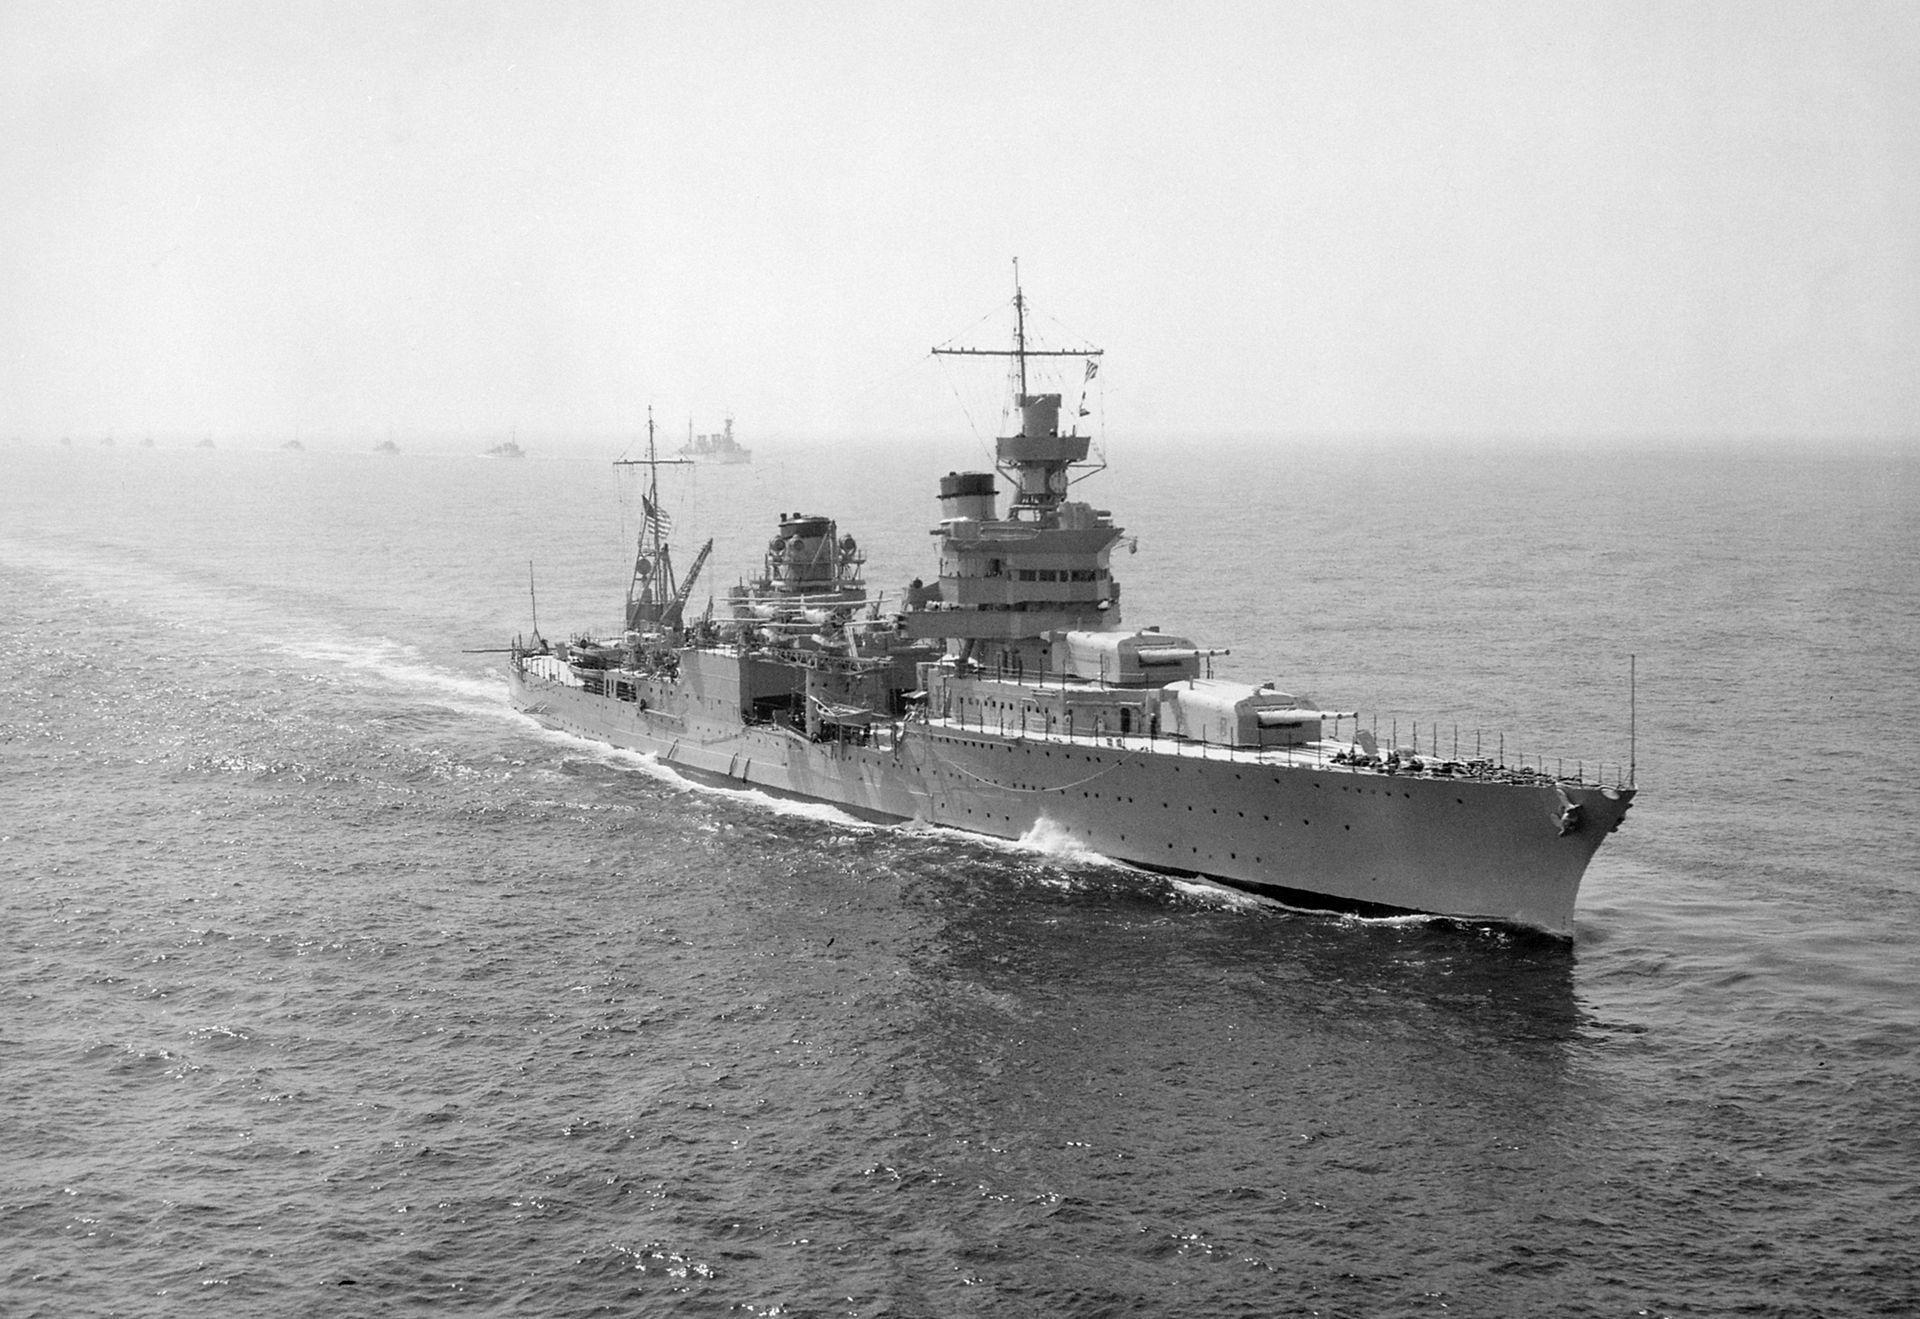 The US Navy heavy cruiser USS Indianapolis in 1939